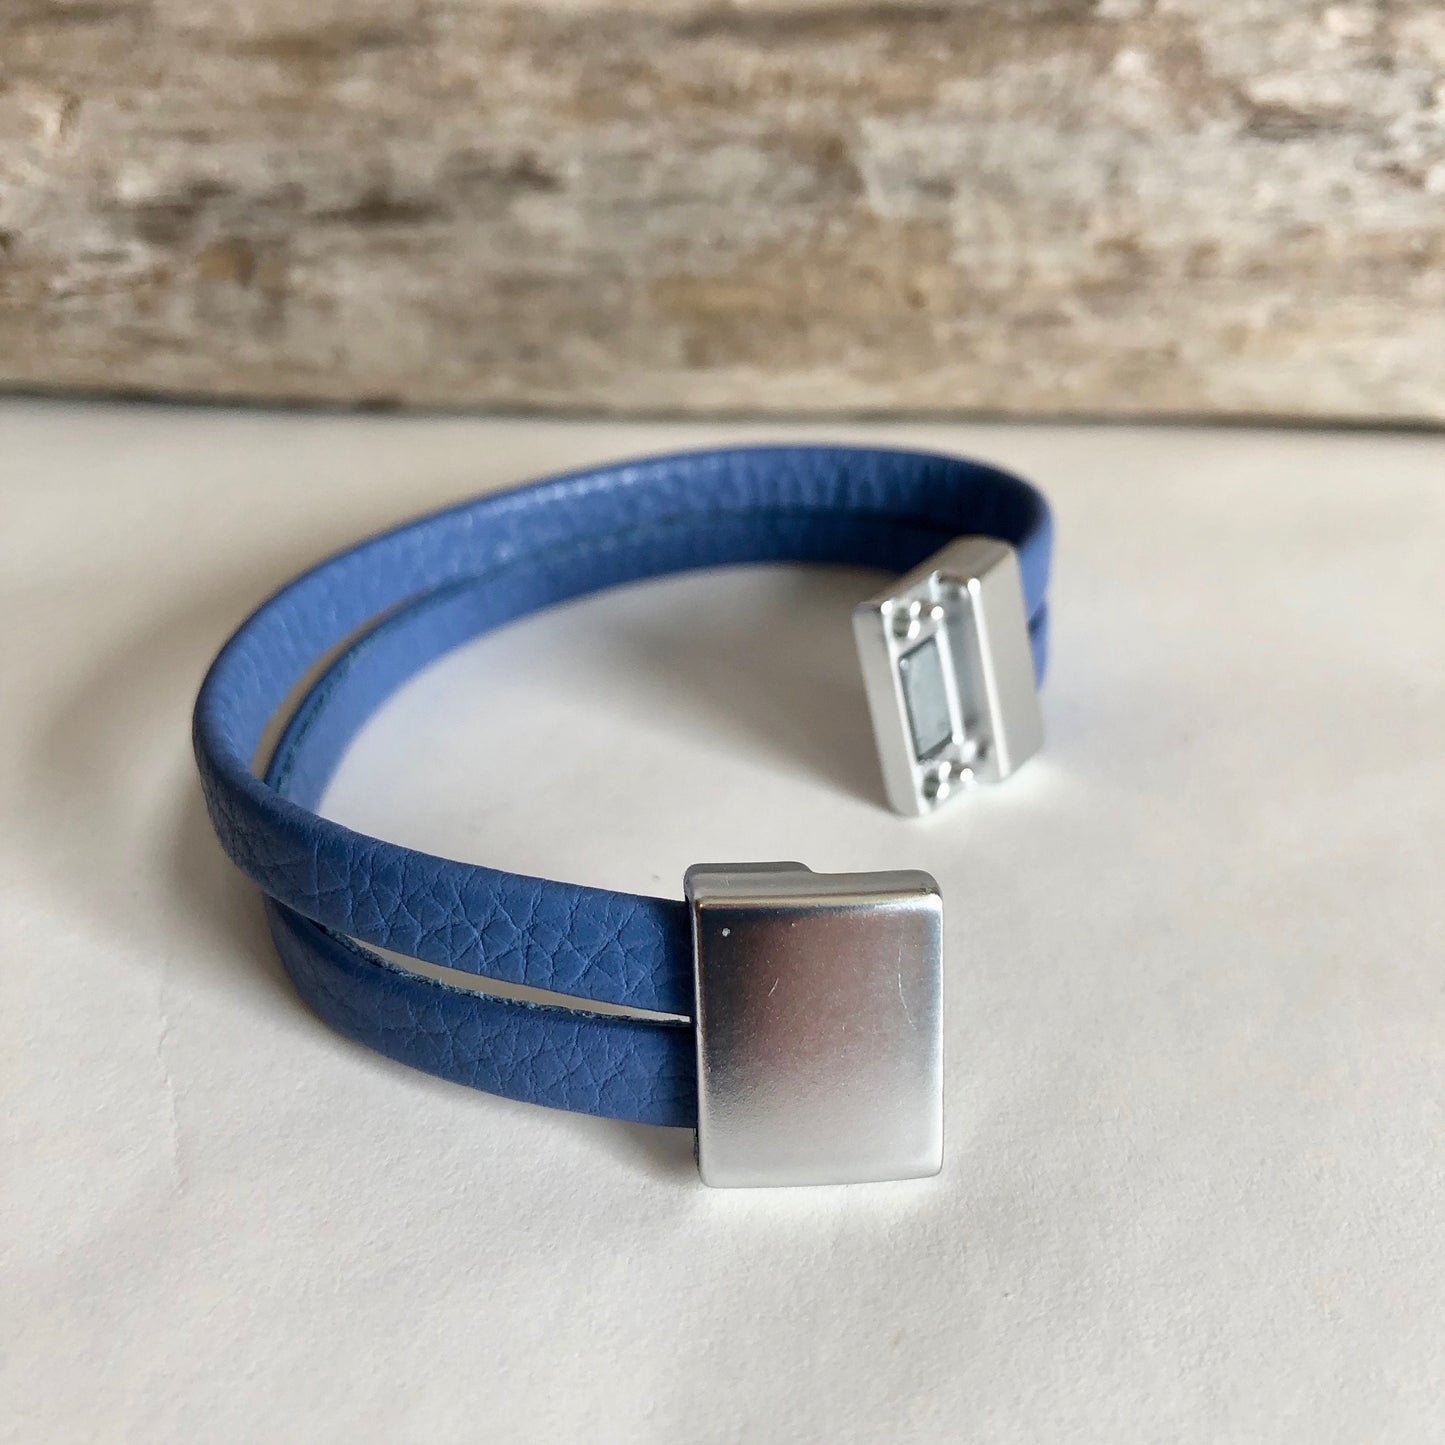 Leather bracelet, made of very soft, fine  Italian leather, and finished with a quality silver  magnetic clasp.